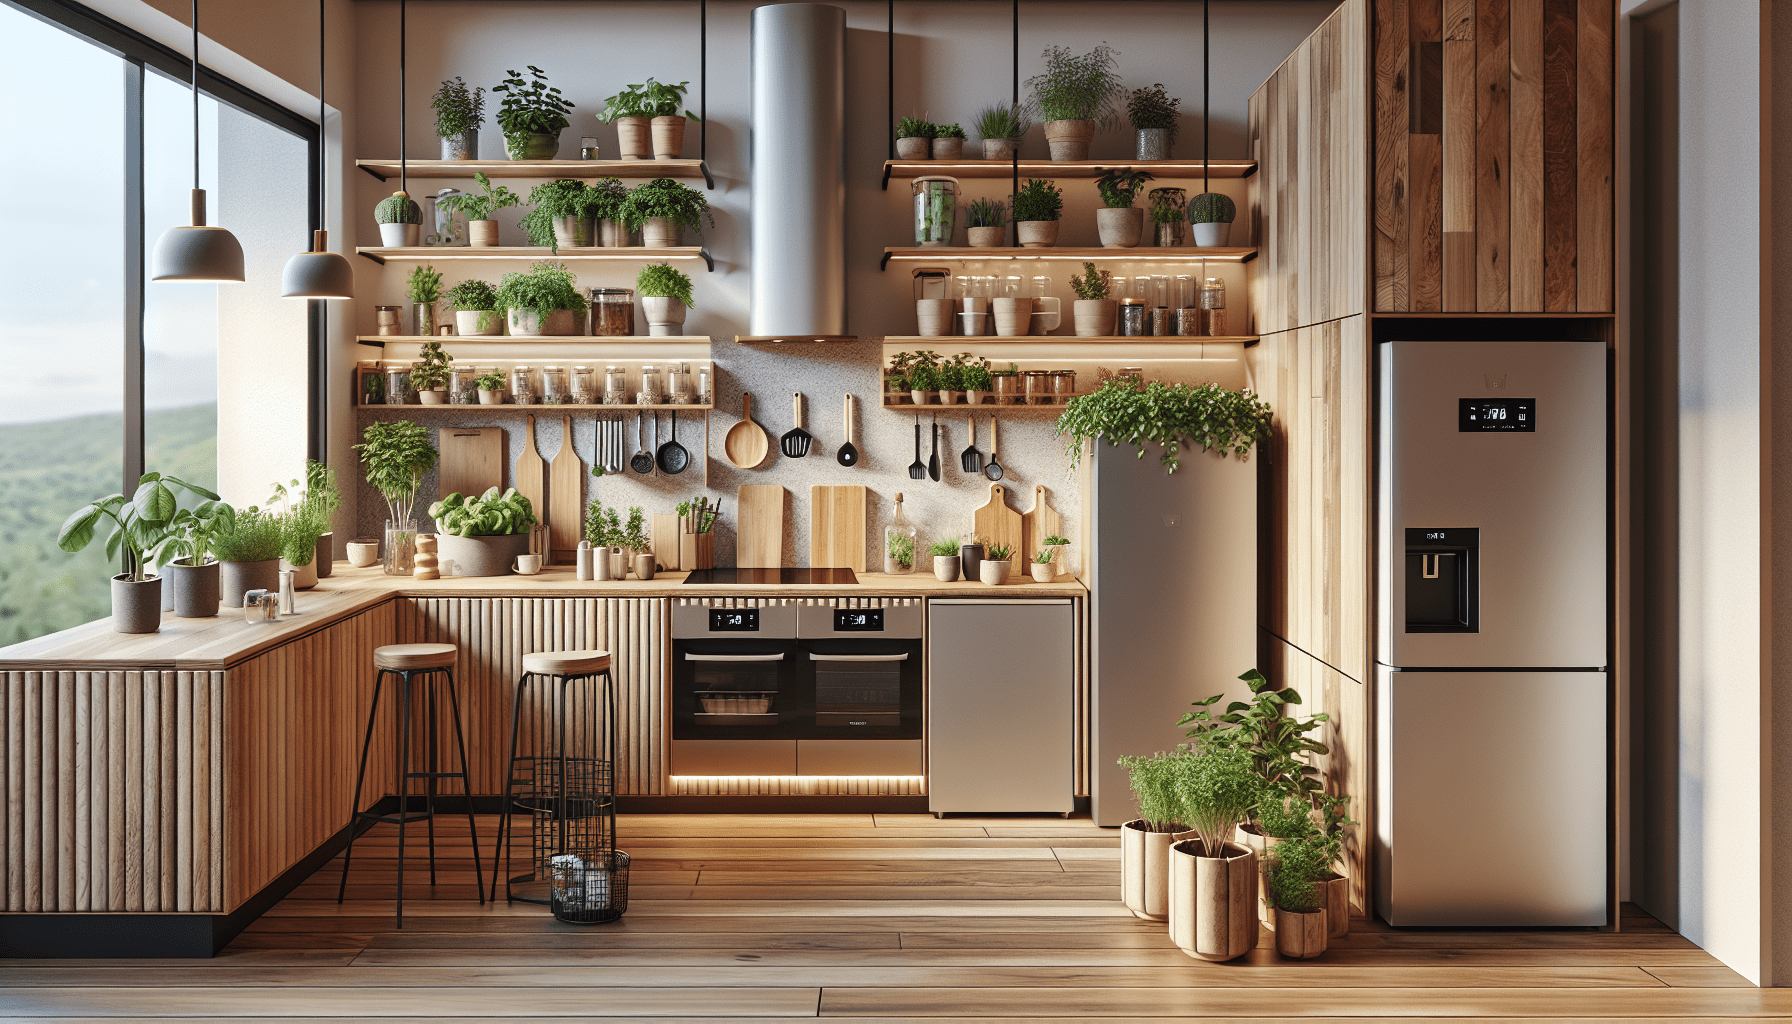 How Can I Design An Eco-friendly Kitchen?